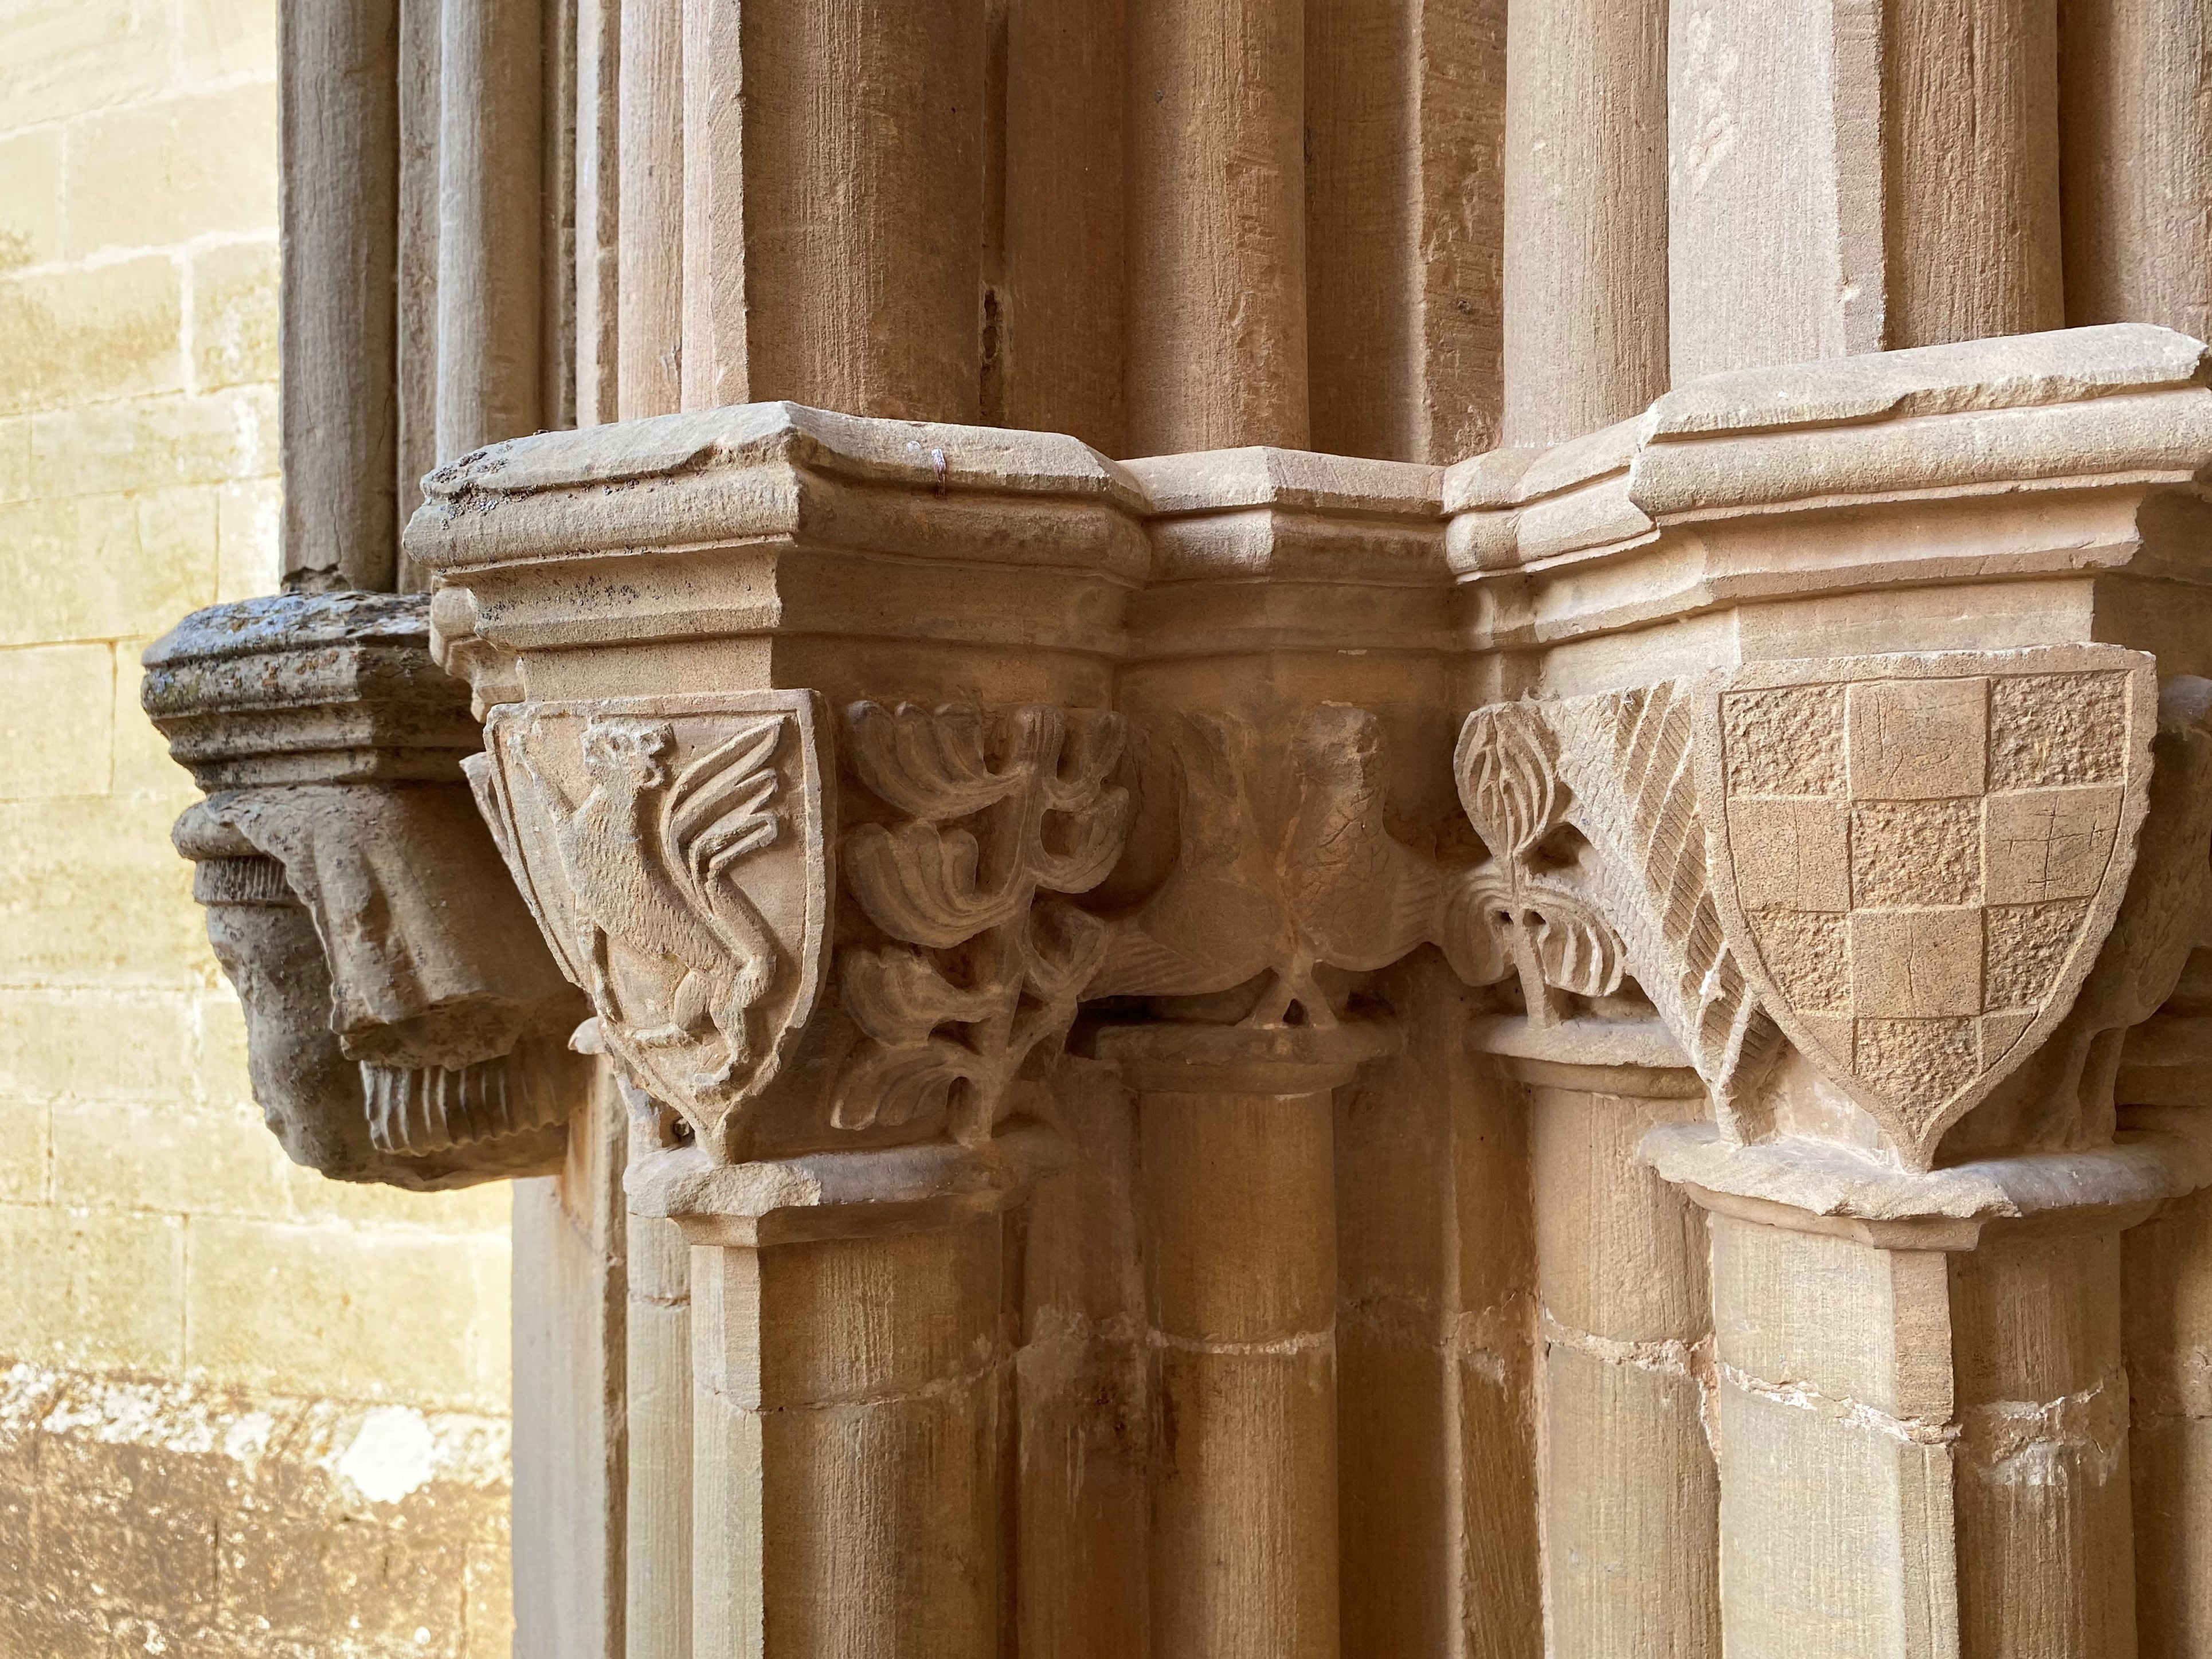 Series of stone capitals with a lion rampant, an intertwined dove and a shield with coat of arms.